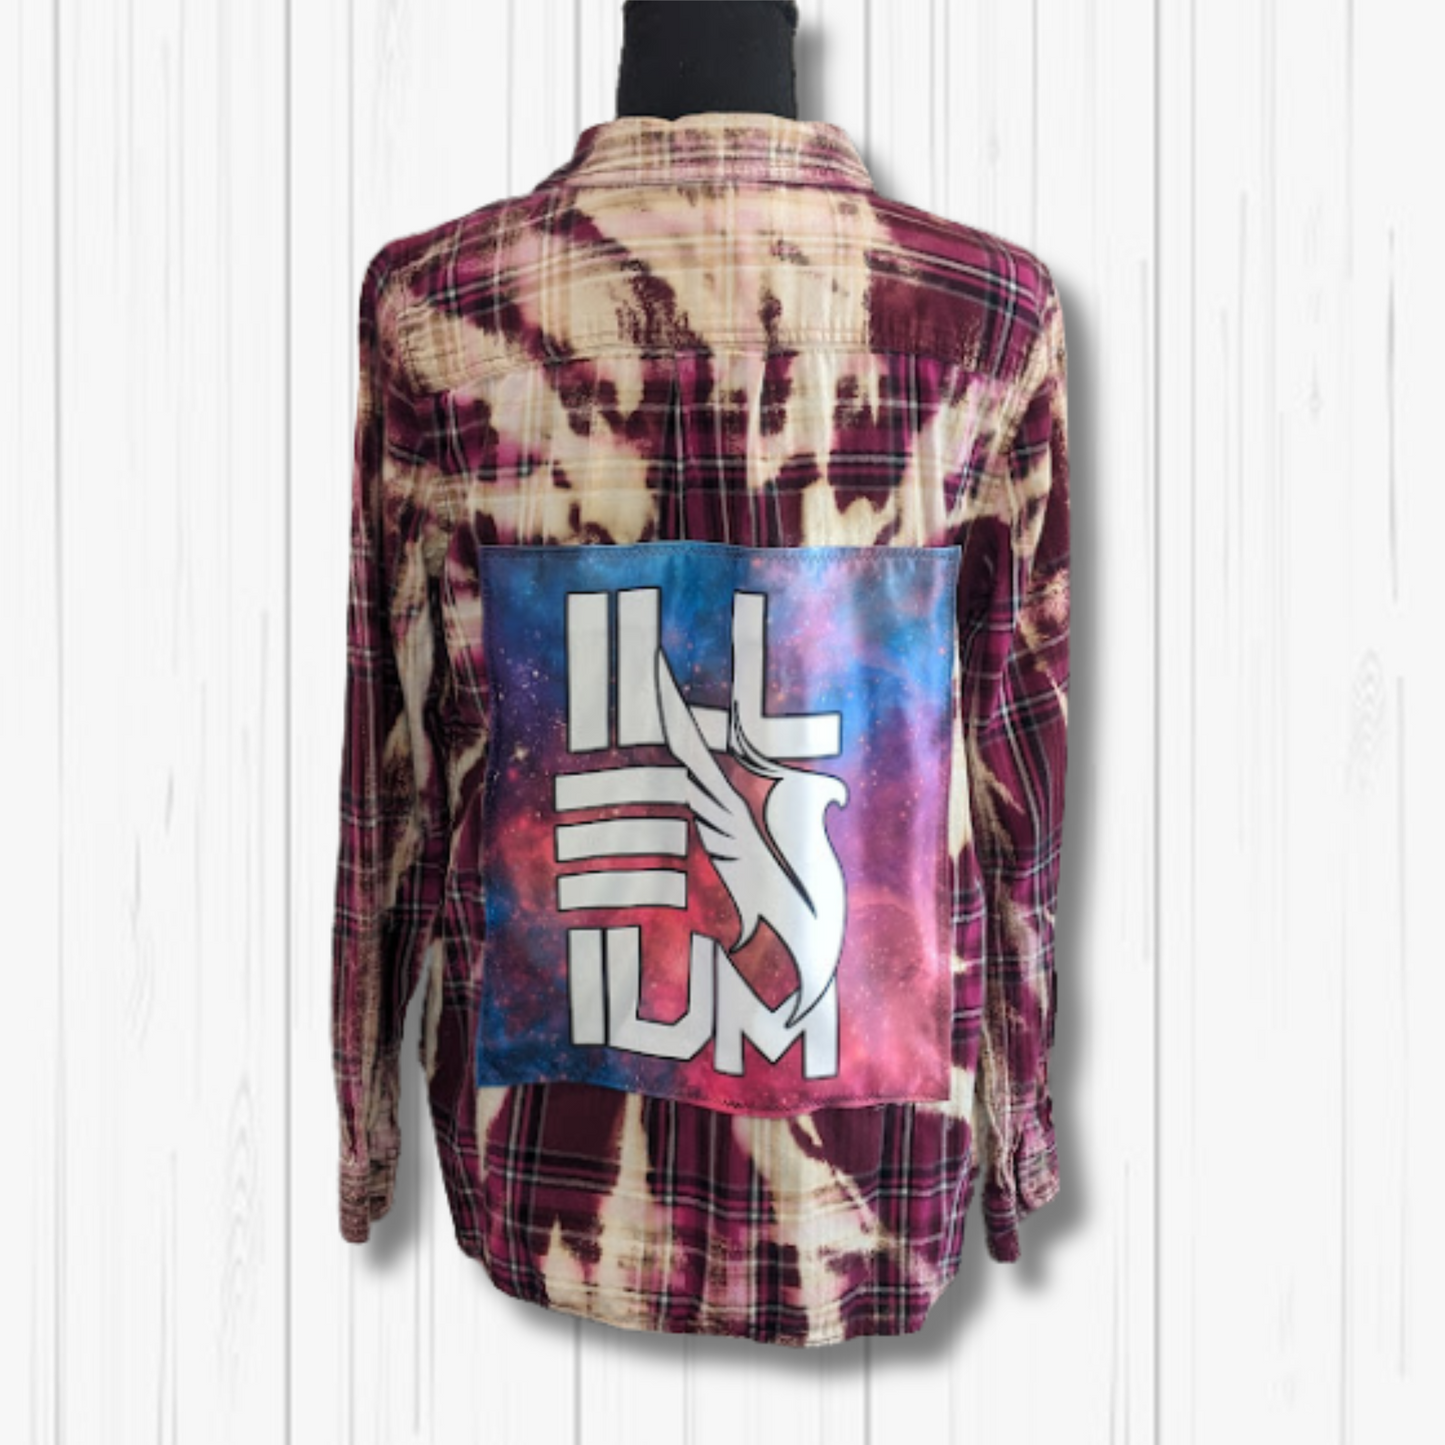 W/L - EDM Pink Galaxy Upcycled Flannel